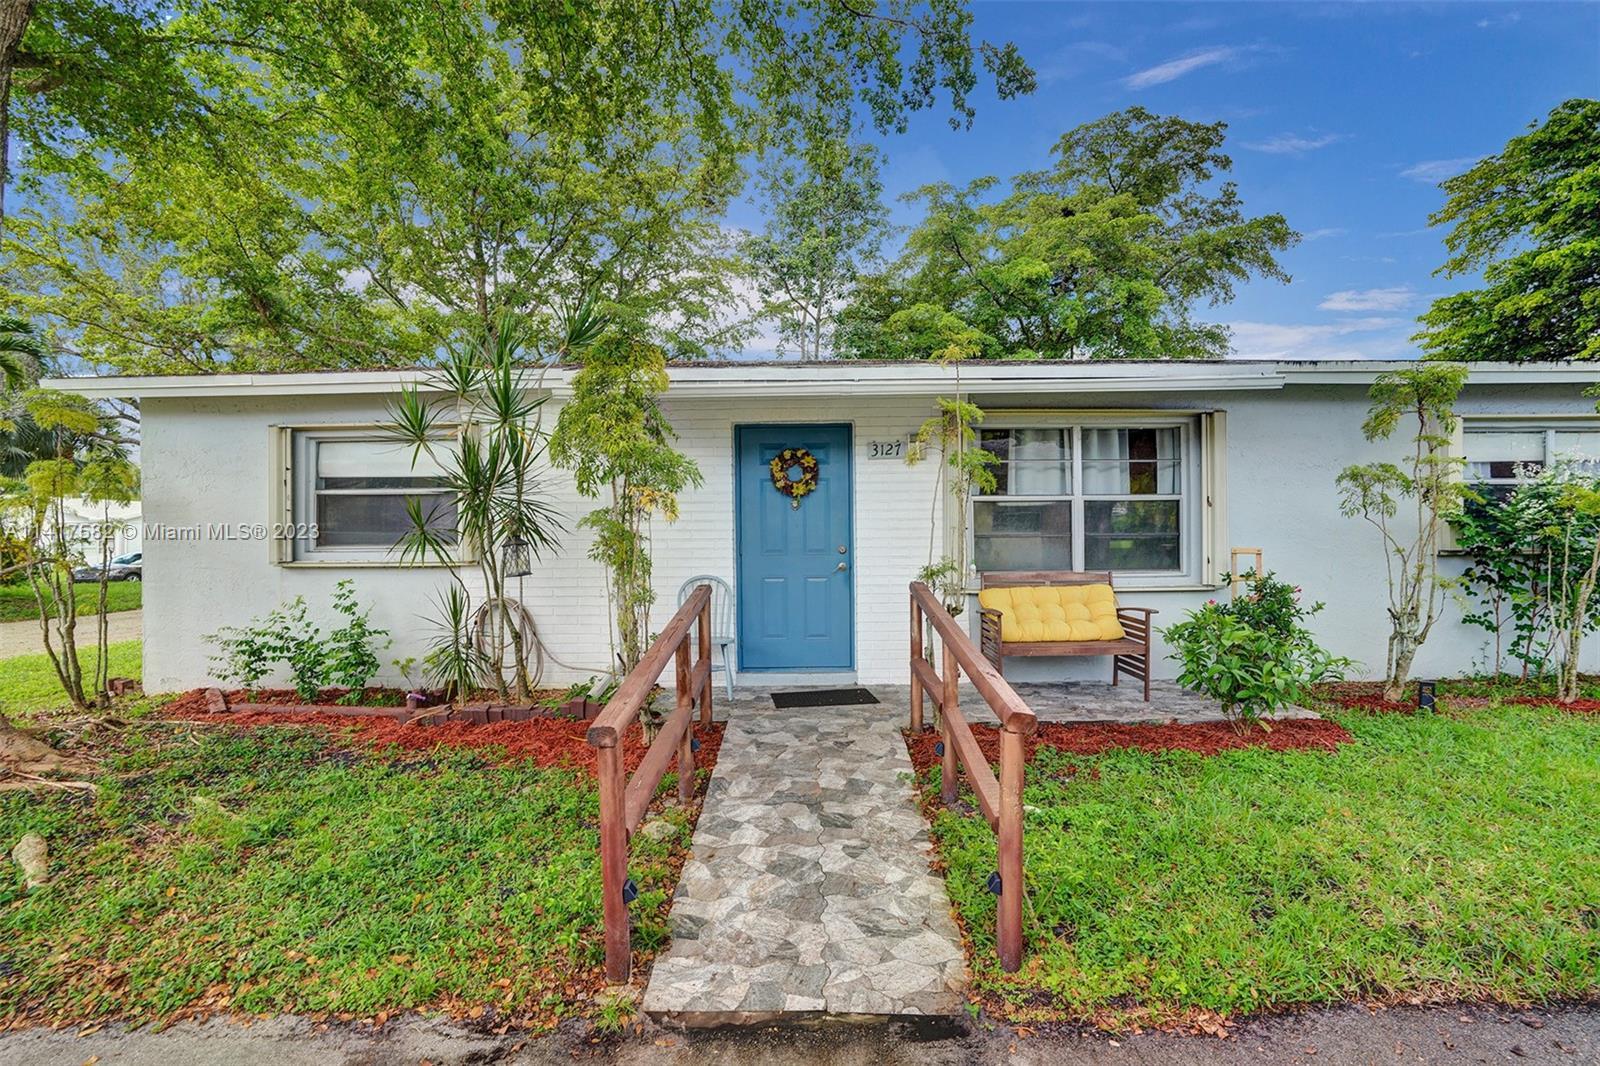 Welcome to 3127 SW Natura Ave, a charming house located in Deerfield Beach, FL. This 3 bedroom, 2 ba